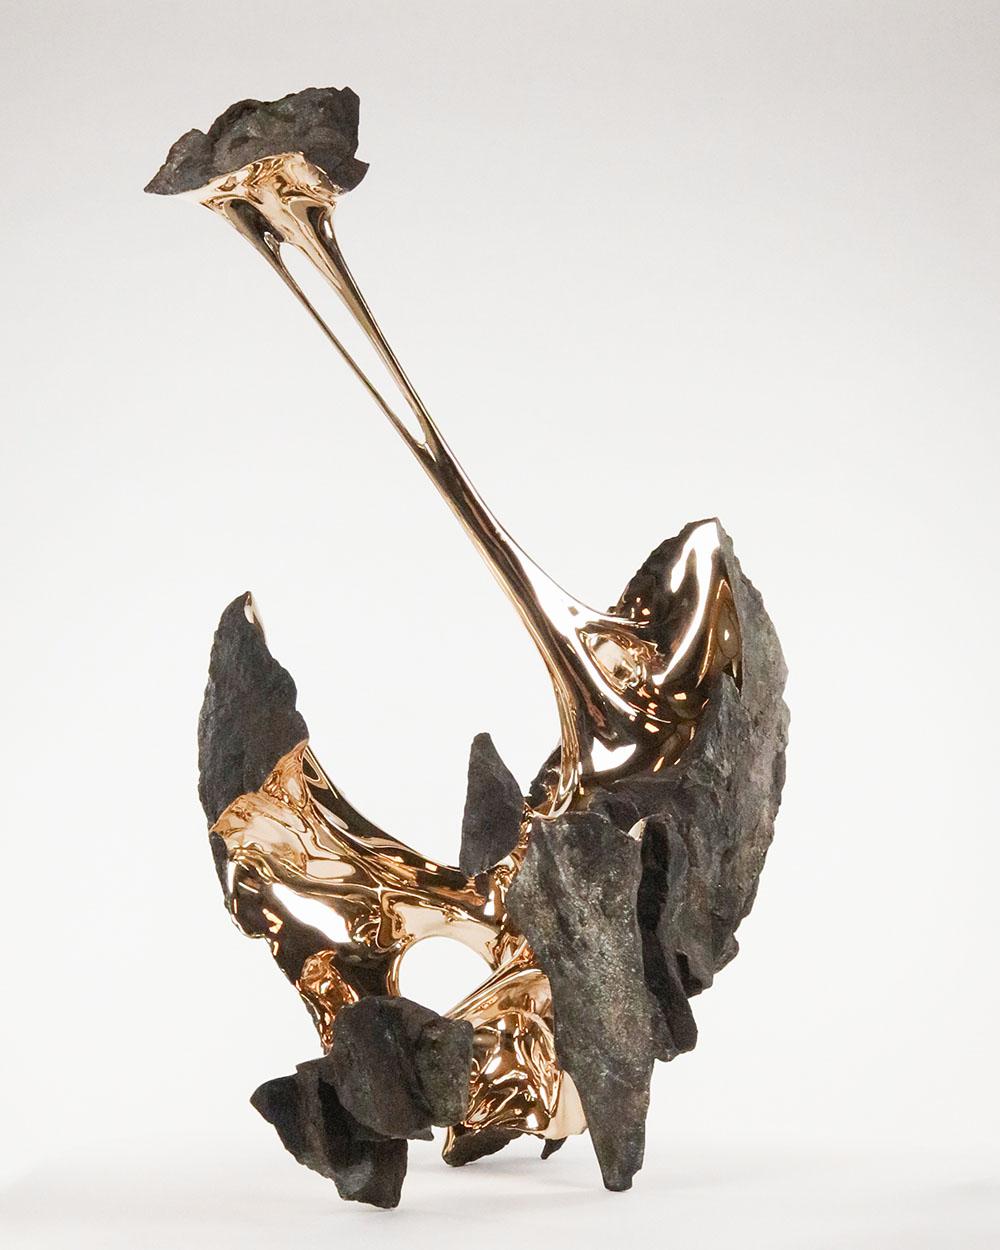 Serendipity is an abstract sculpture by the French contemporary artist Romain Langlois.

Gold tone polished bronze sculpture: 102 cm × 64 cm × 88 cm. Edition of 8 + 4 A.P.
This sculpture is available in a gold version and a black tourmaline patina